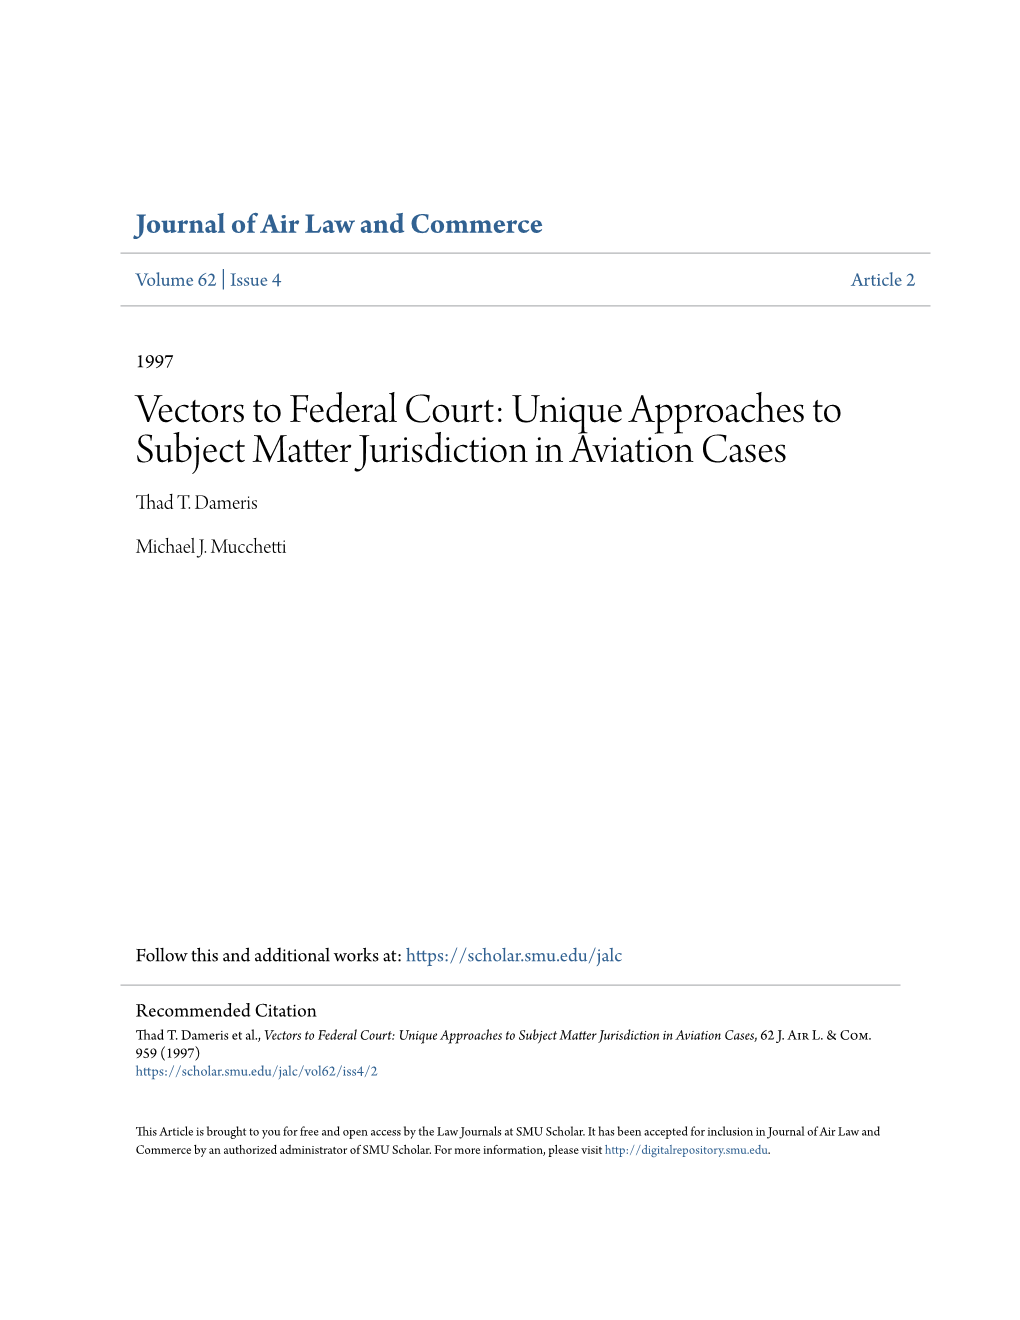 Vectors to Federal Court: Unique Approaches to Subject Matter Jurisdiction in Aviation Cases Thad T